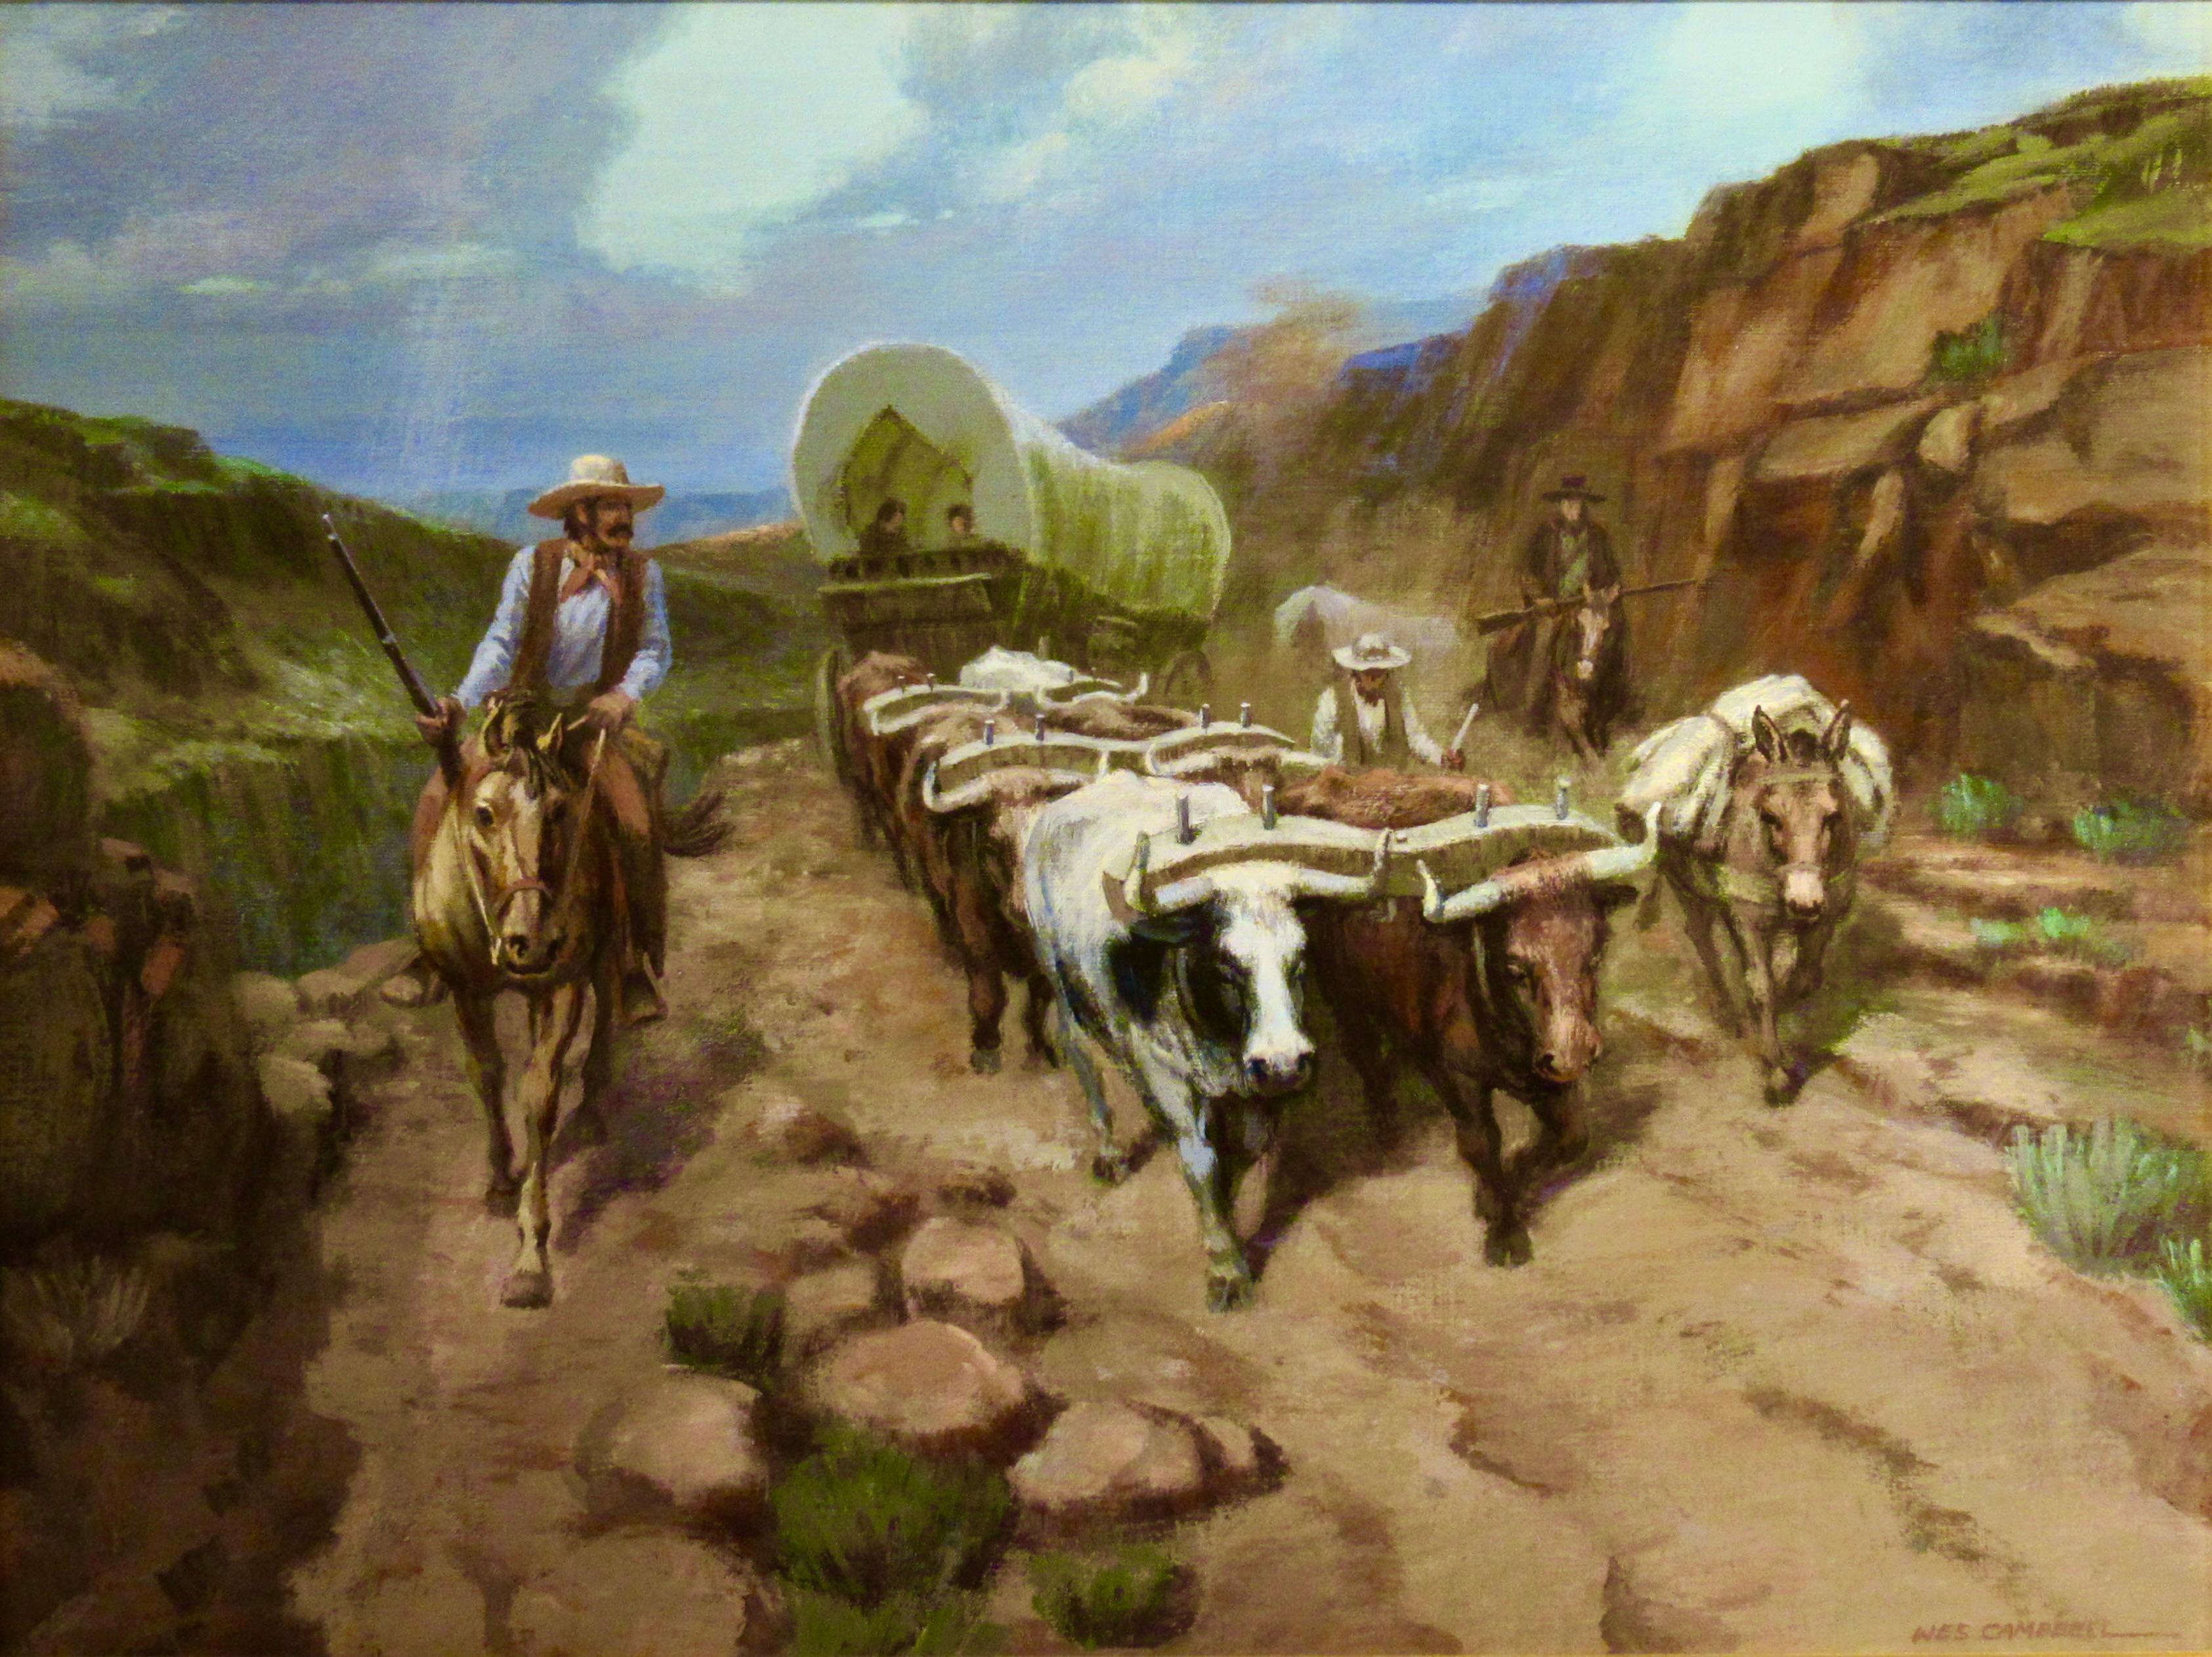 The Dusty Trail - Painting by Wes Campbell